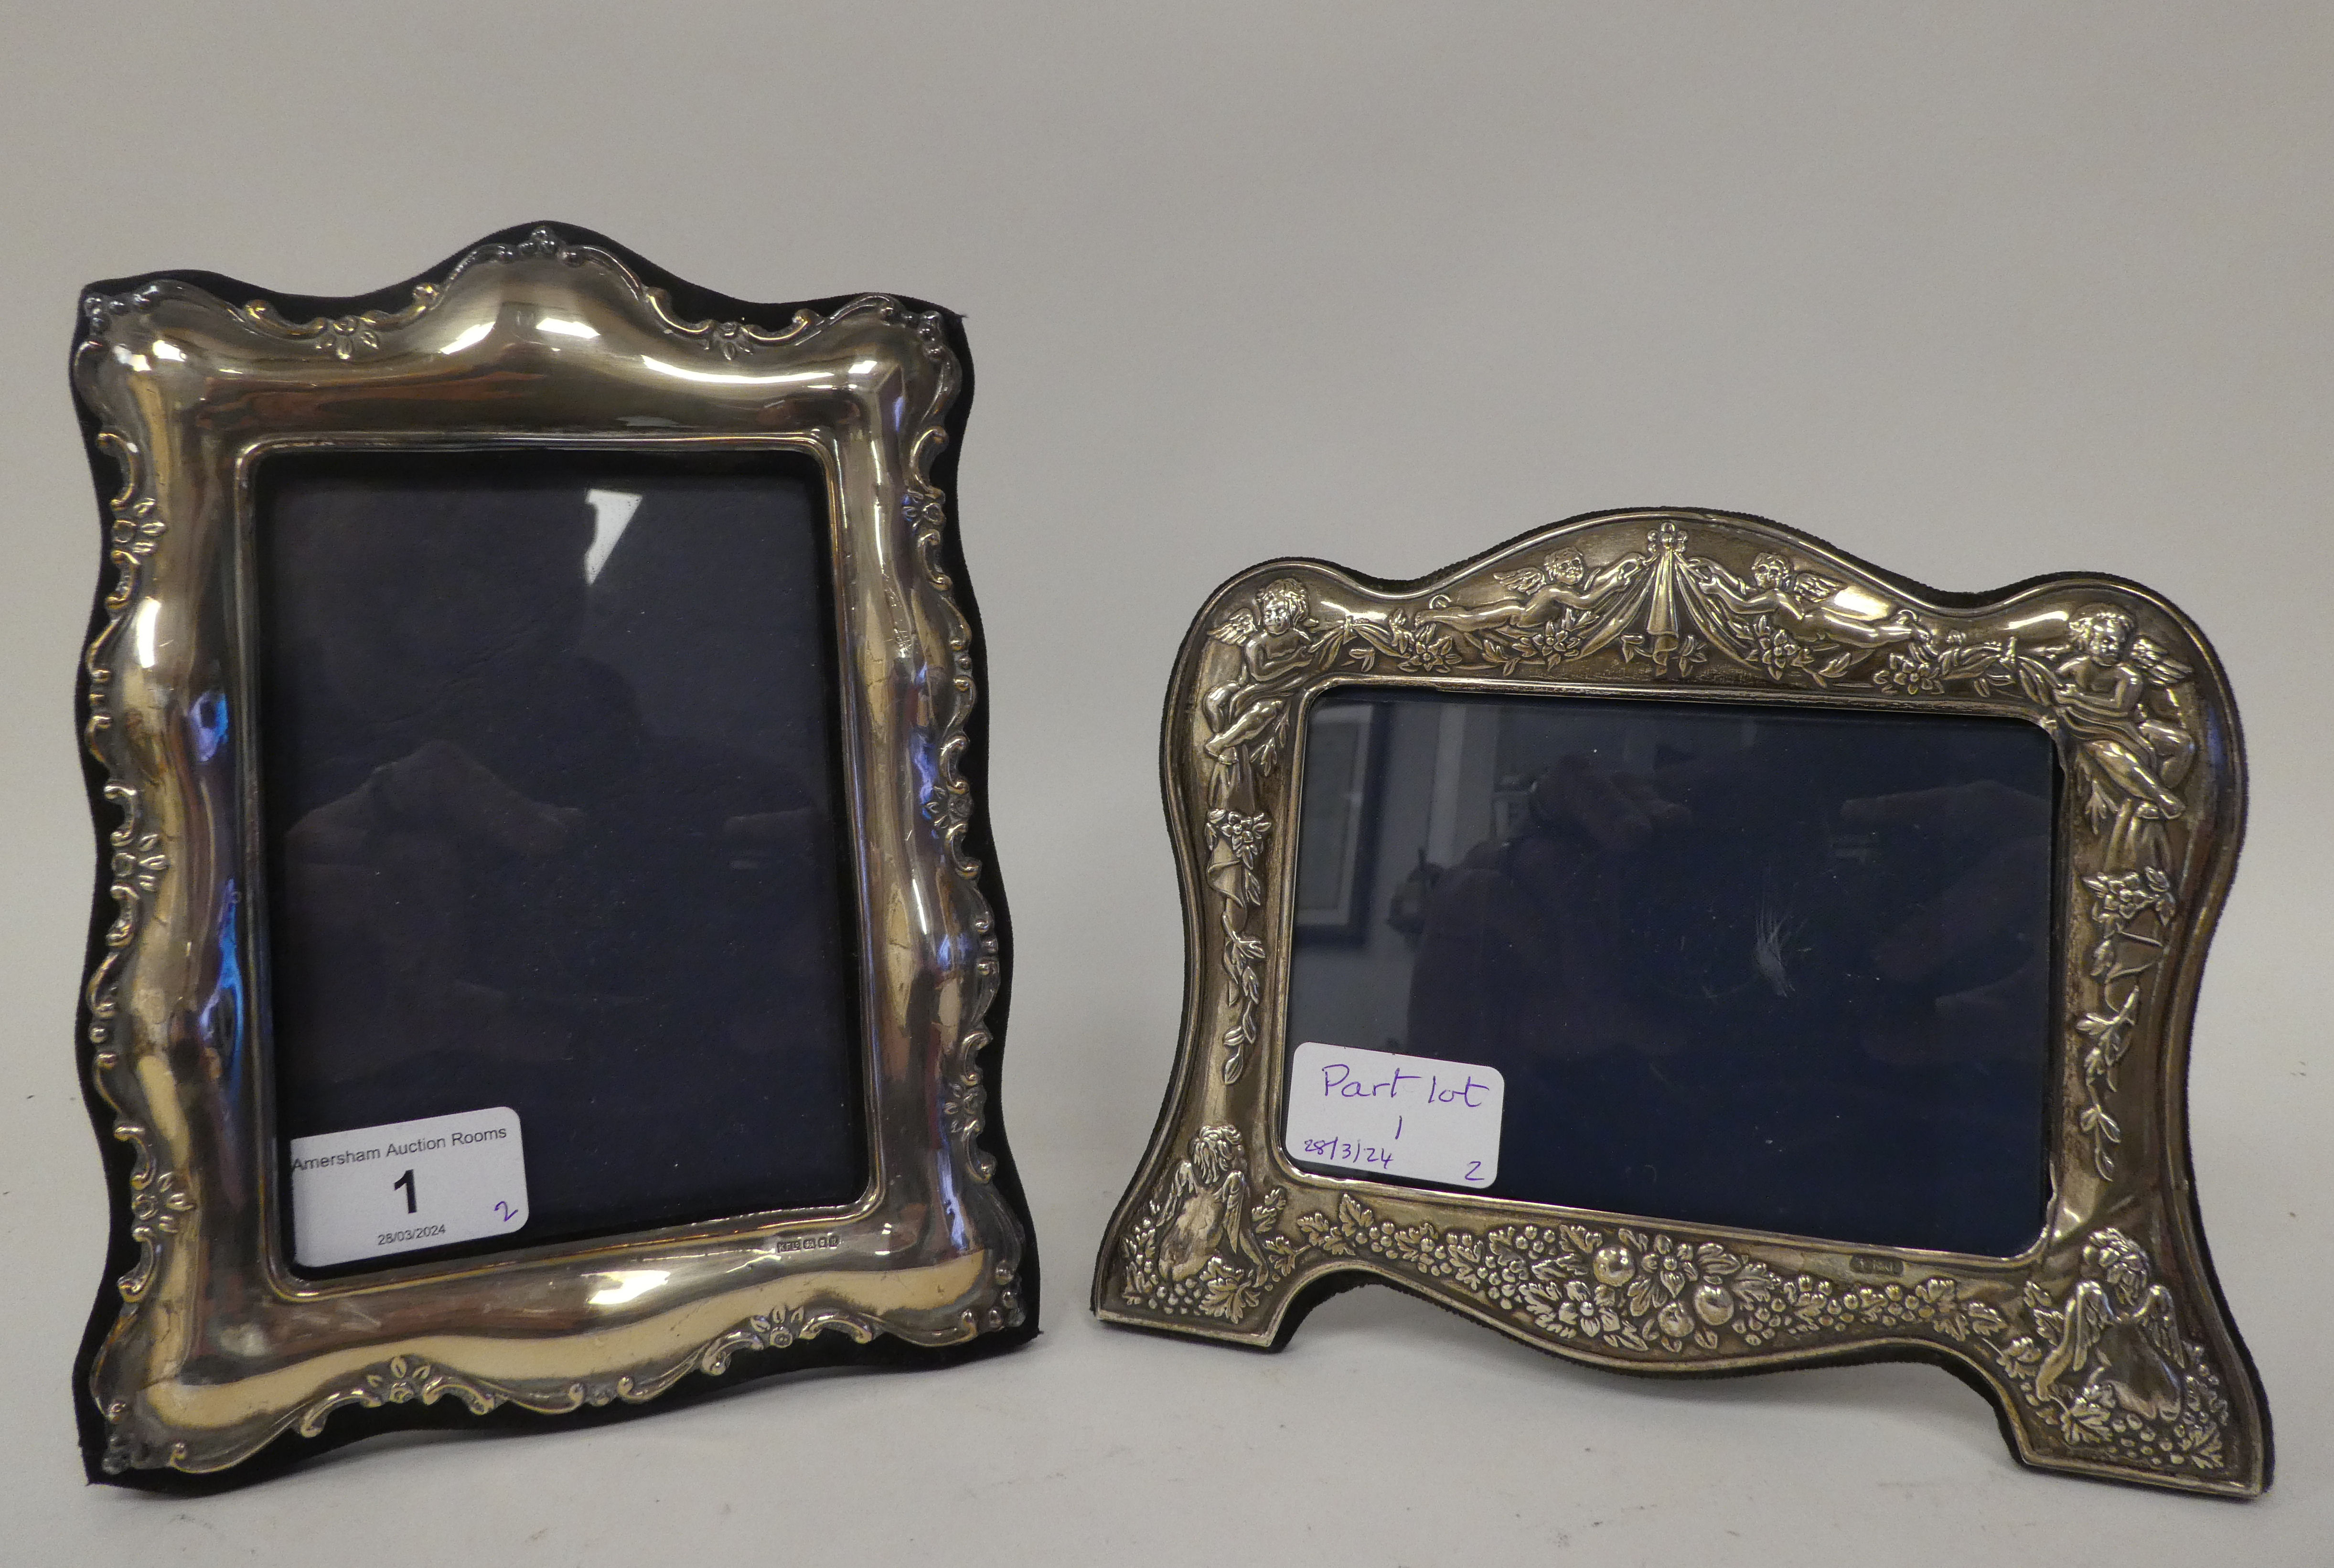 Two dissimilar, glazed, silver mounted photograph frames with embossed ornament, fabric backs and